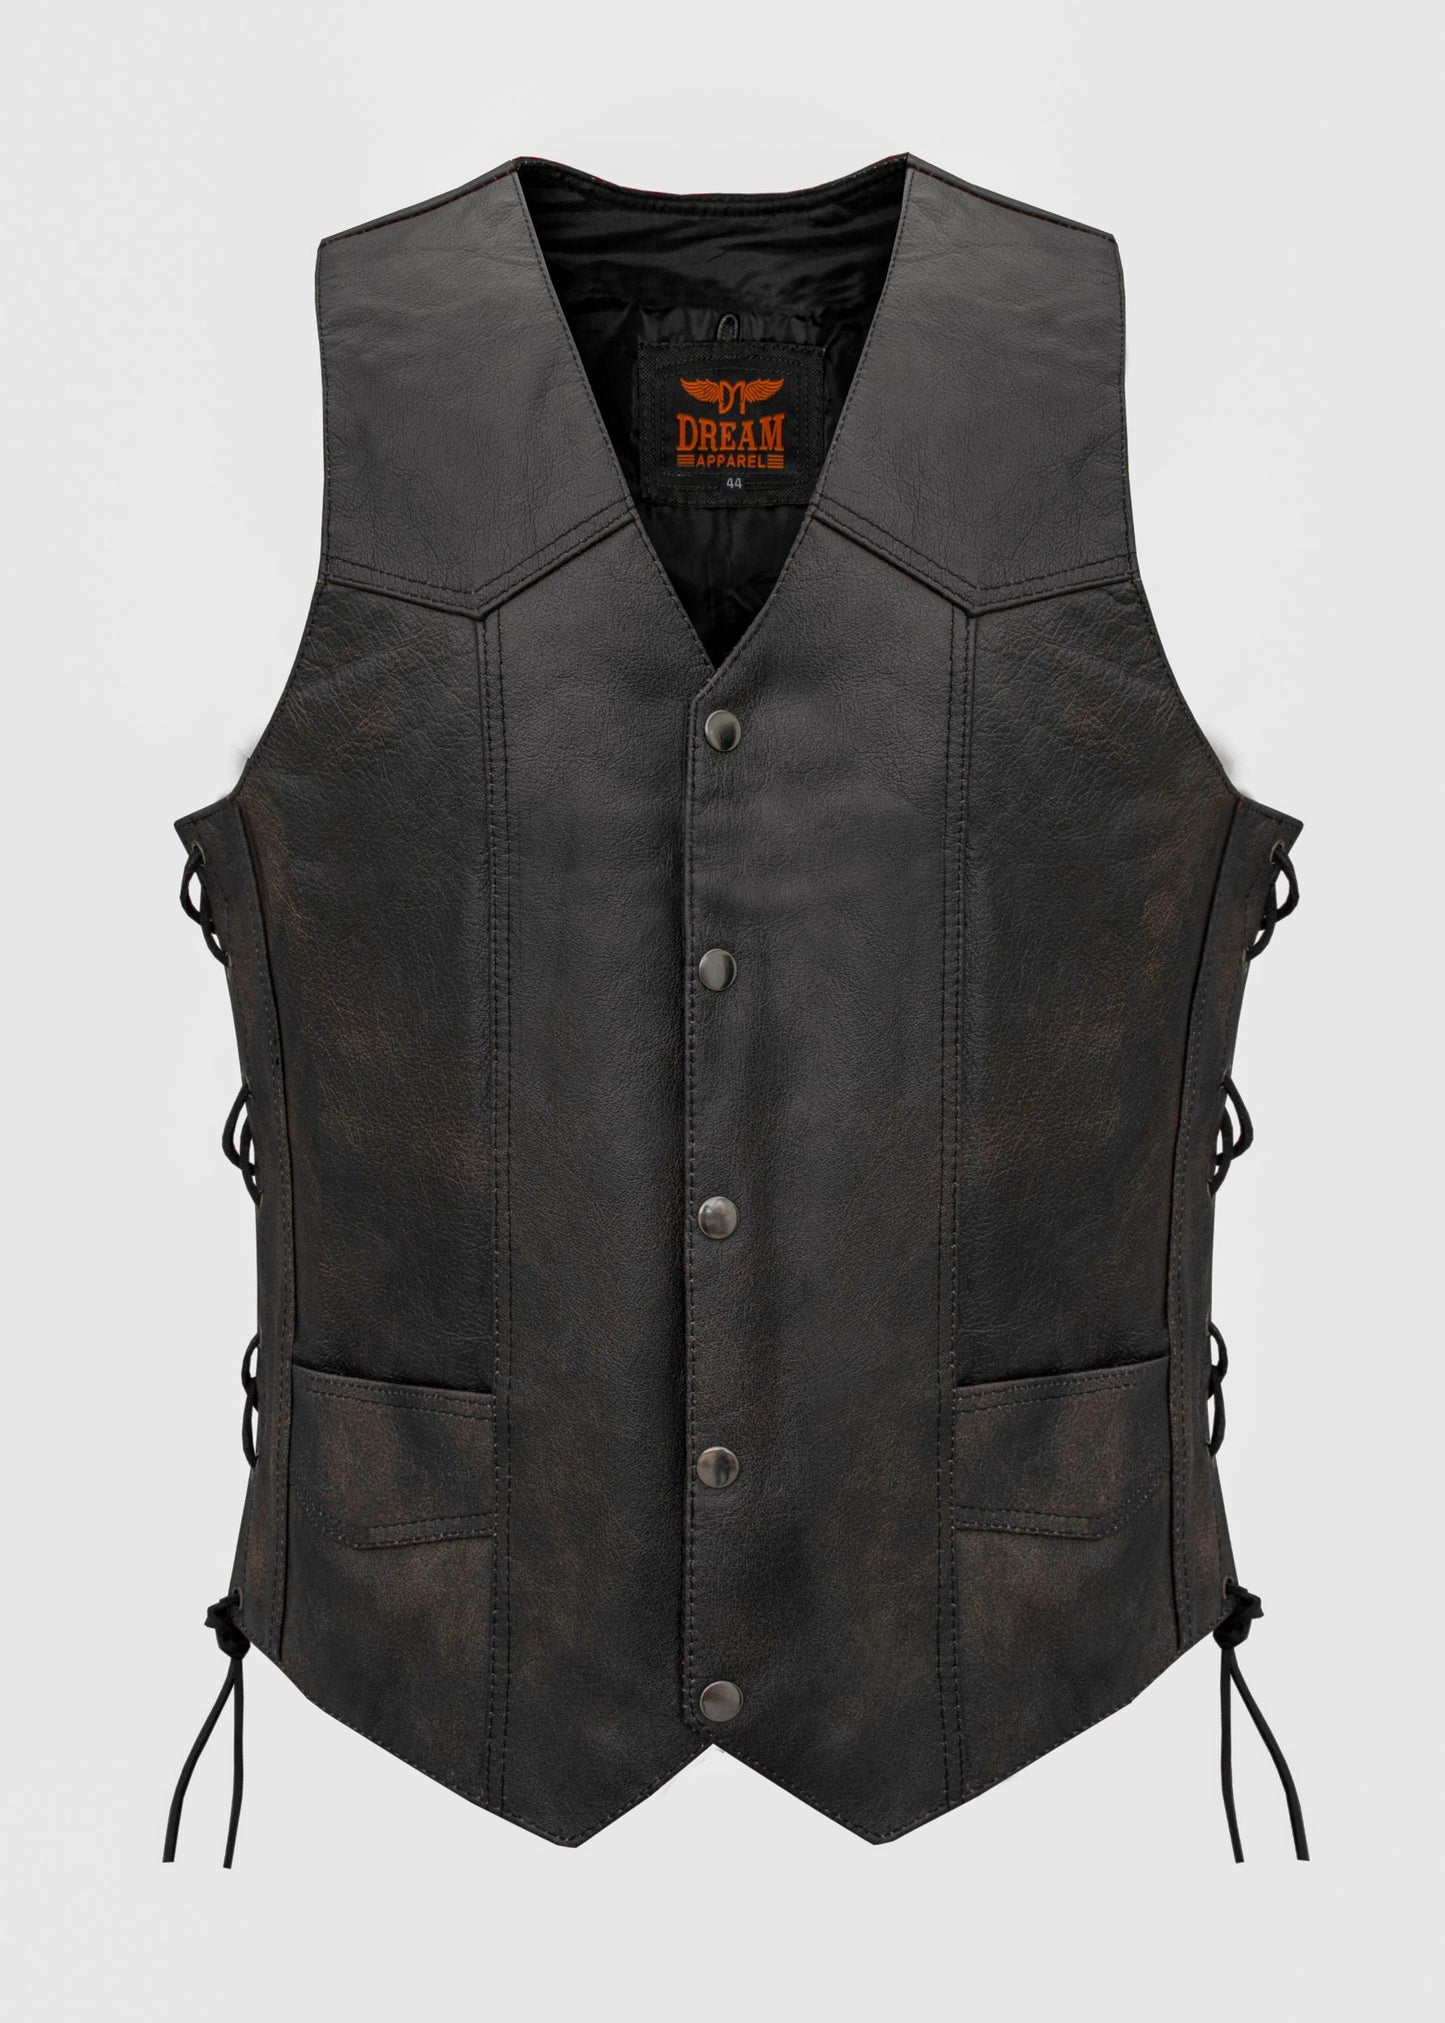 Men's Distressed Brown Vest, Side Laces with Emboss Eagle, Live to Ride, Ride to Live